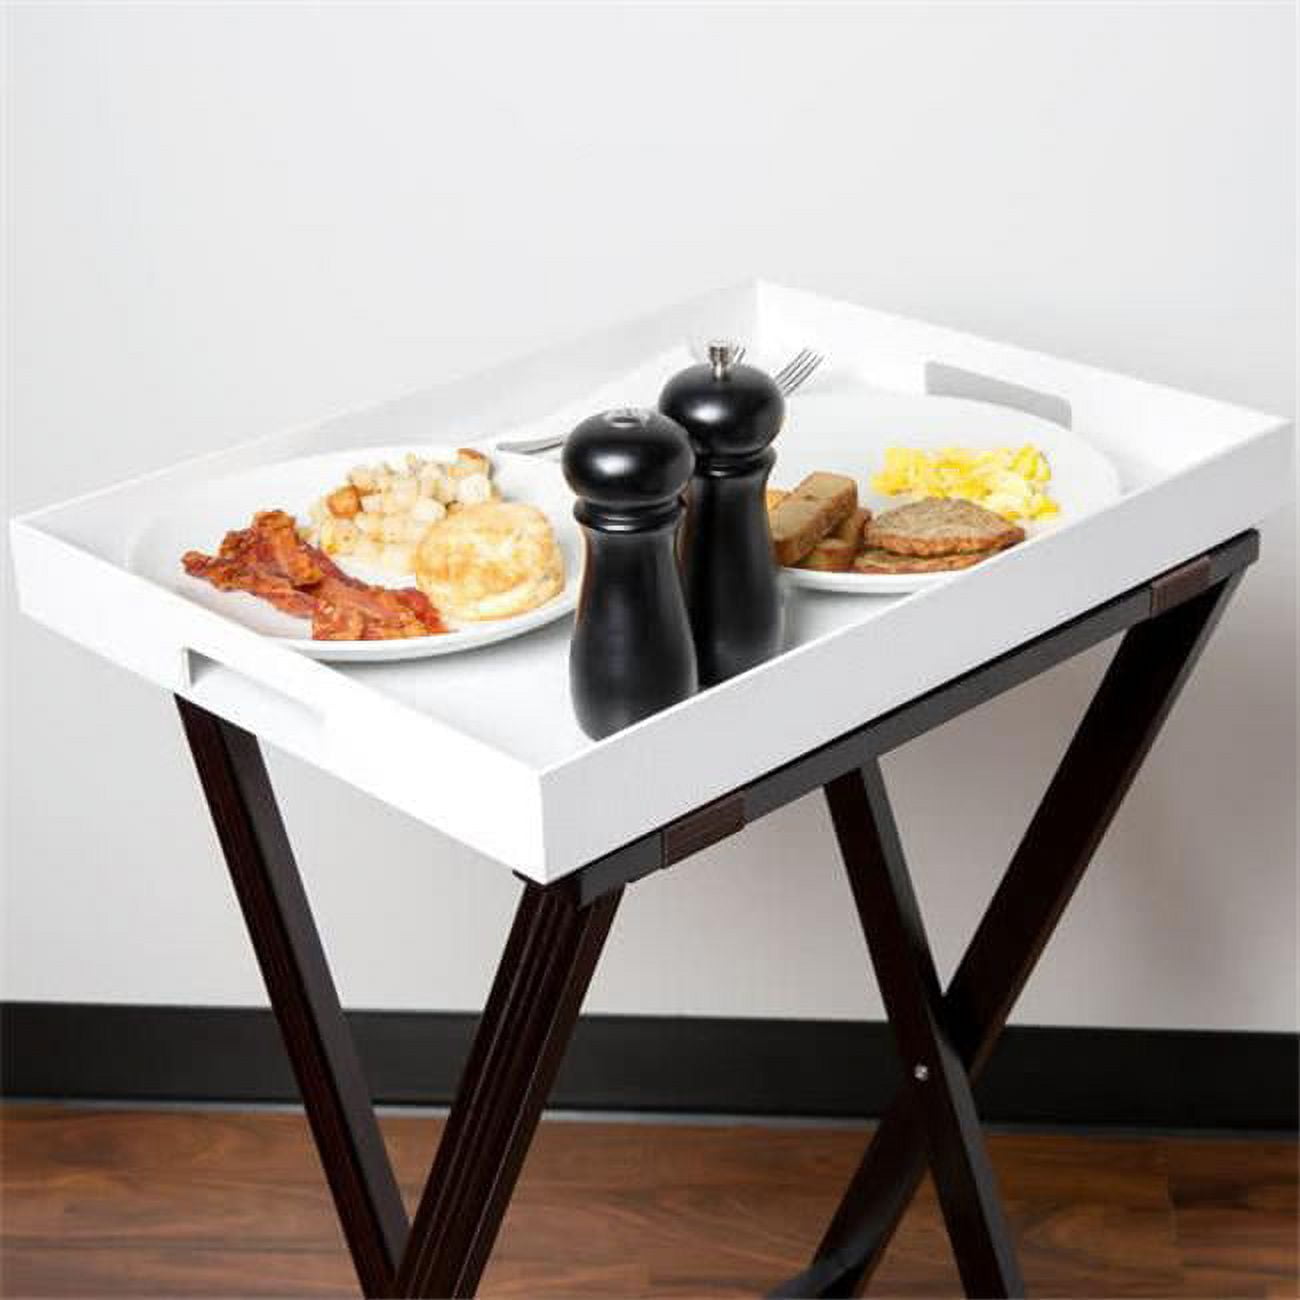 3475-2-15 Room Tray White Abs - 22 X 16 In.